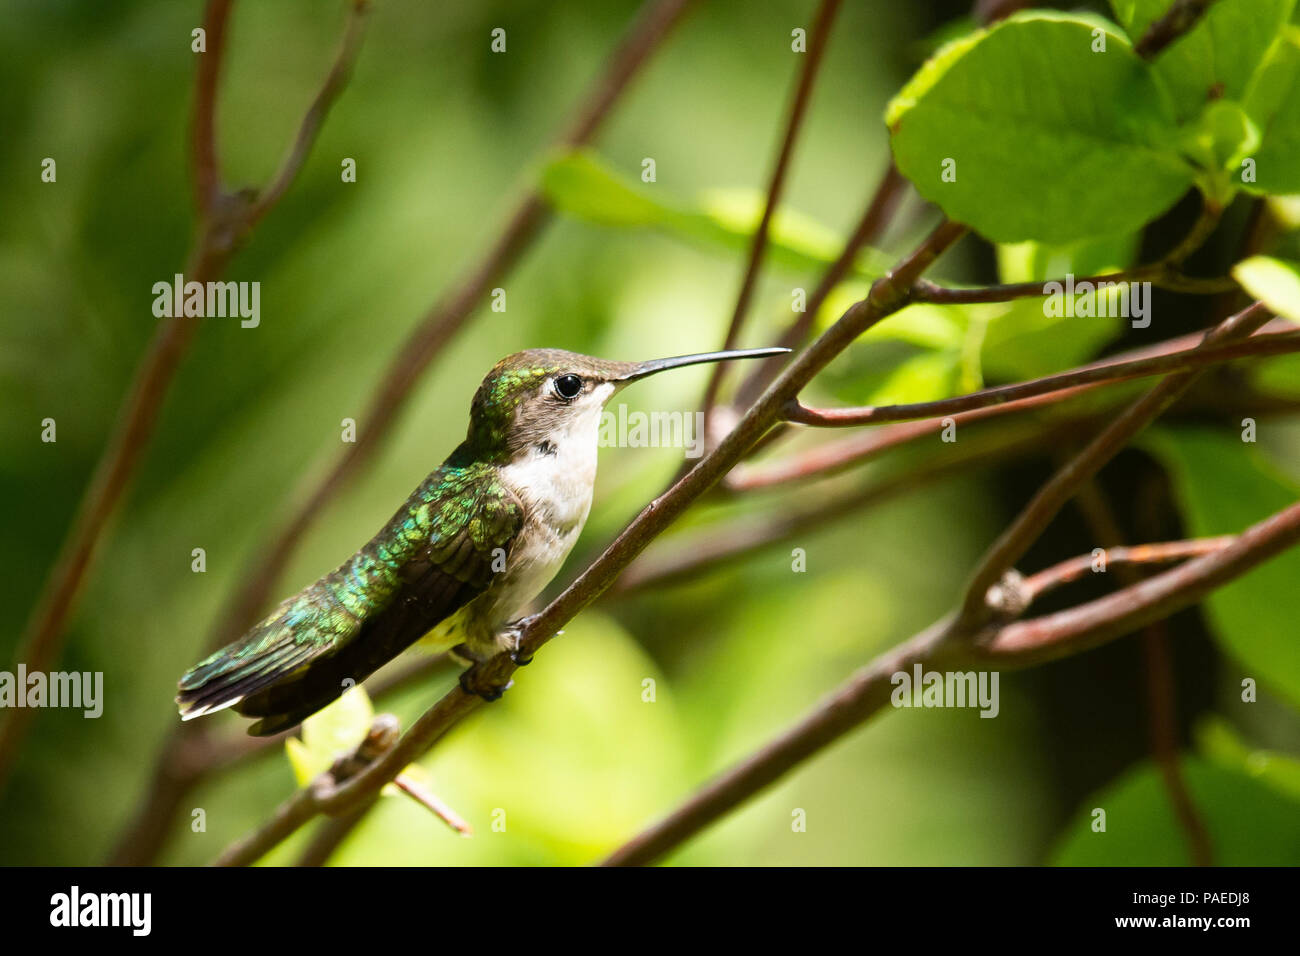 A female ruby throated hummingbird, Archilochus colubris, perched on a tree branch in the garden resting in Speculator, NY USA Stock Photo